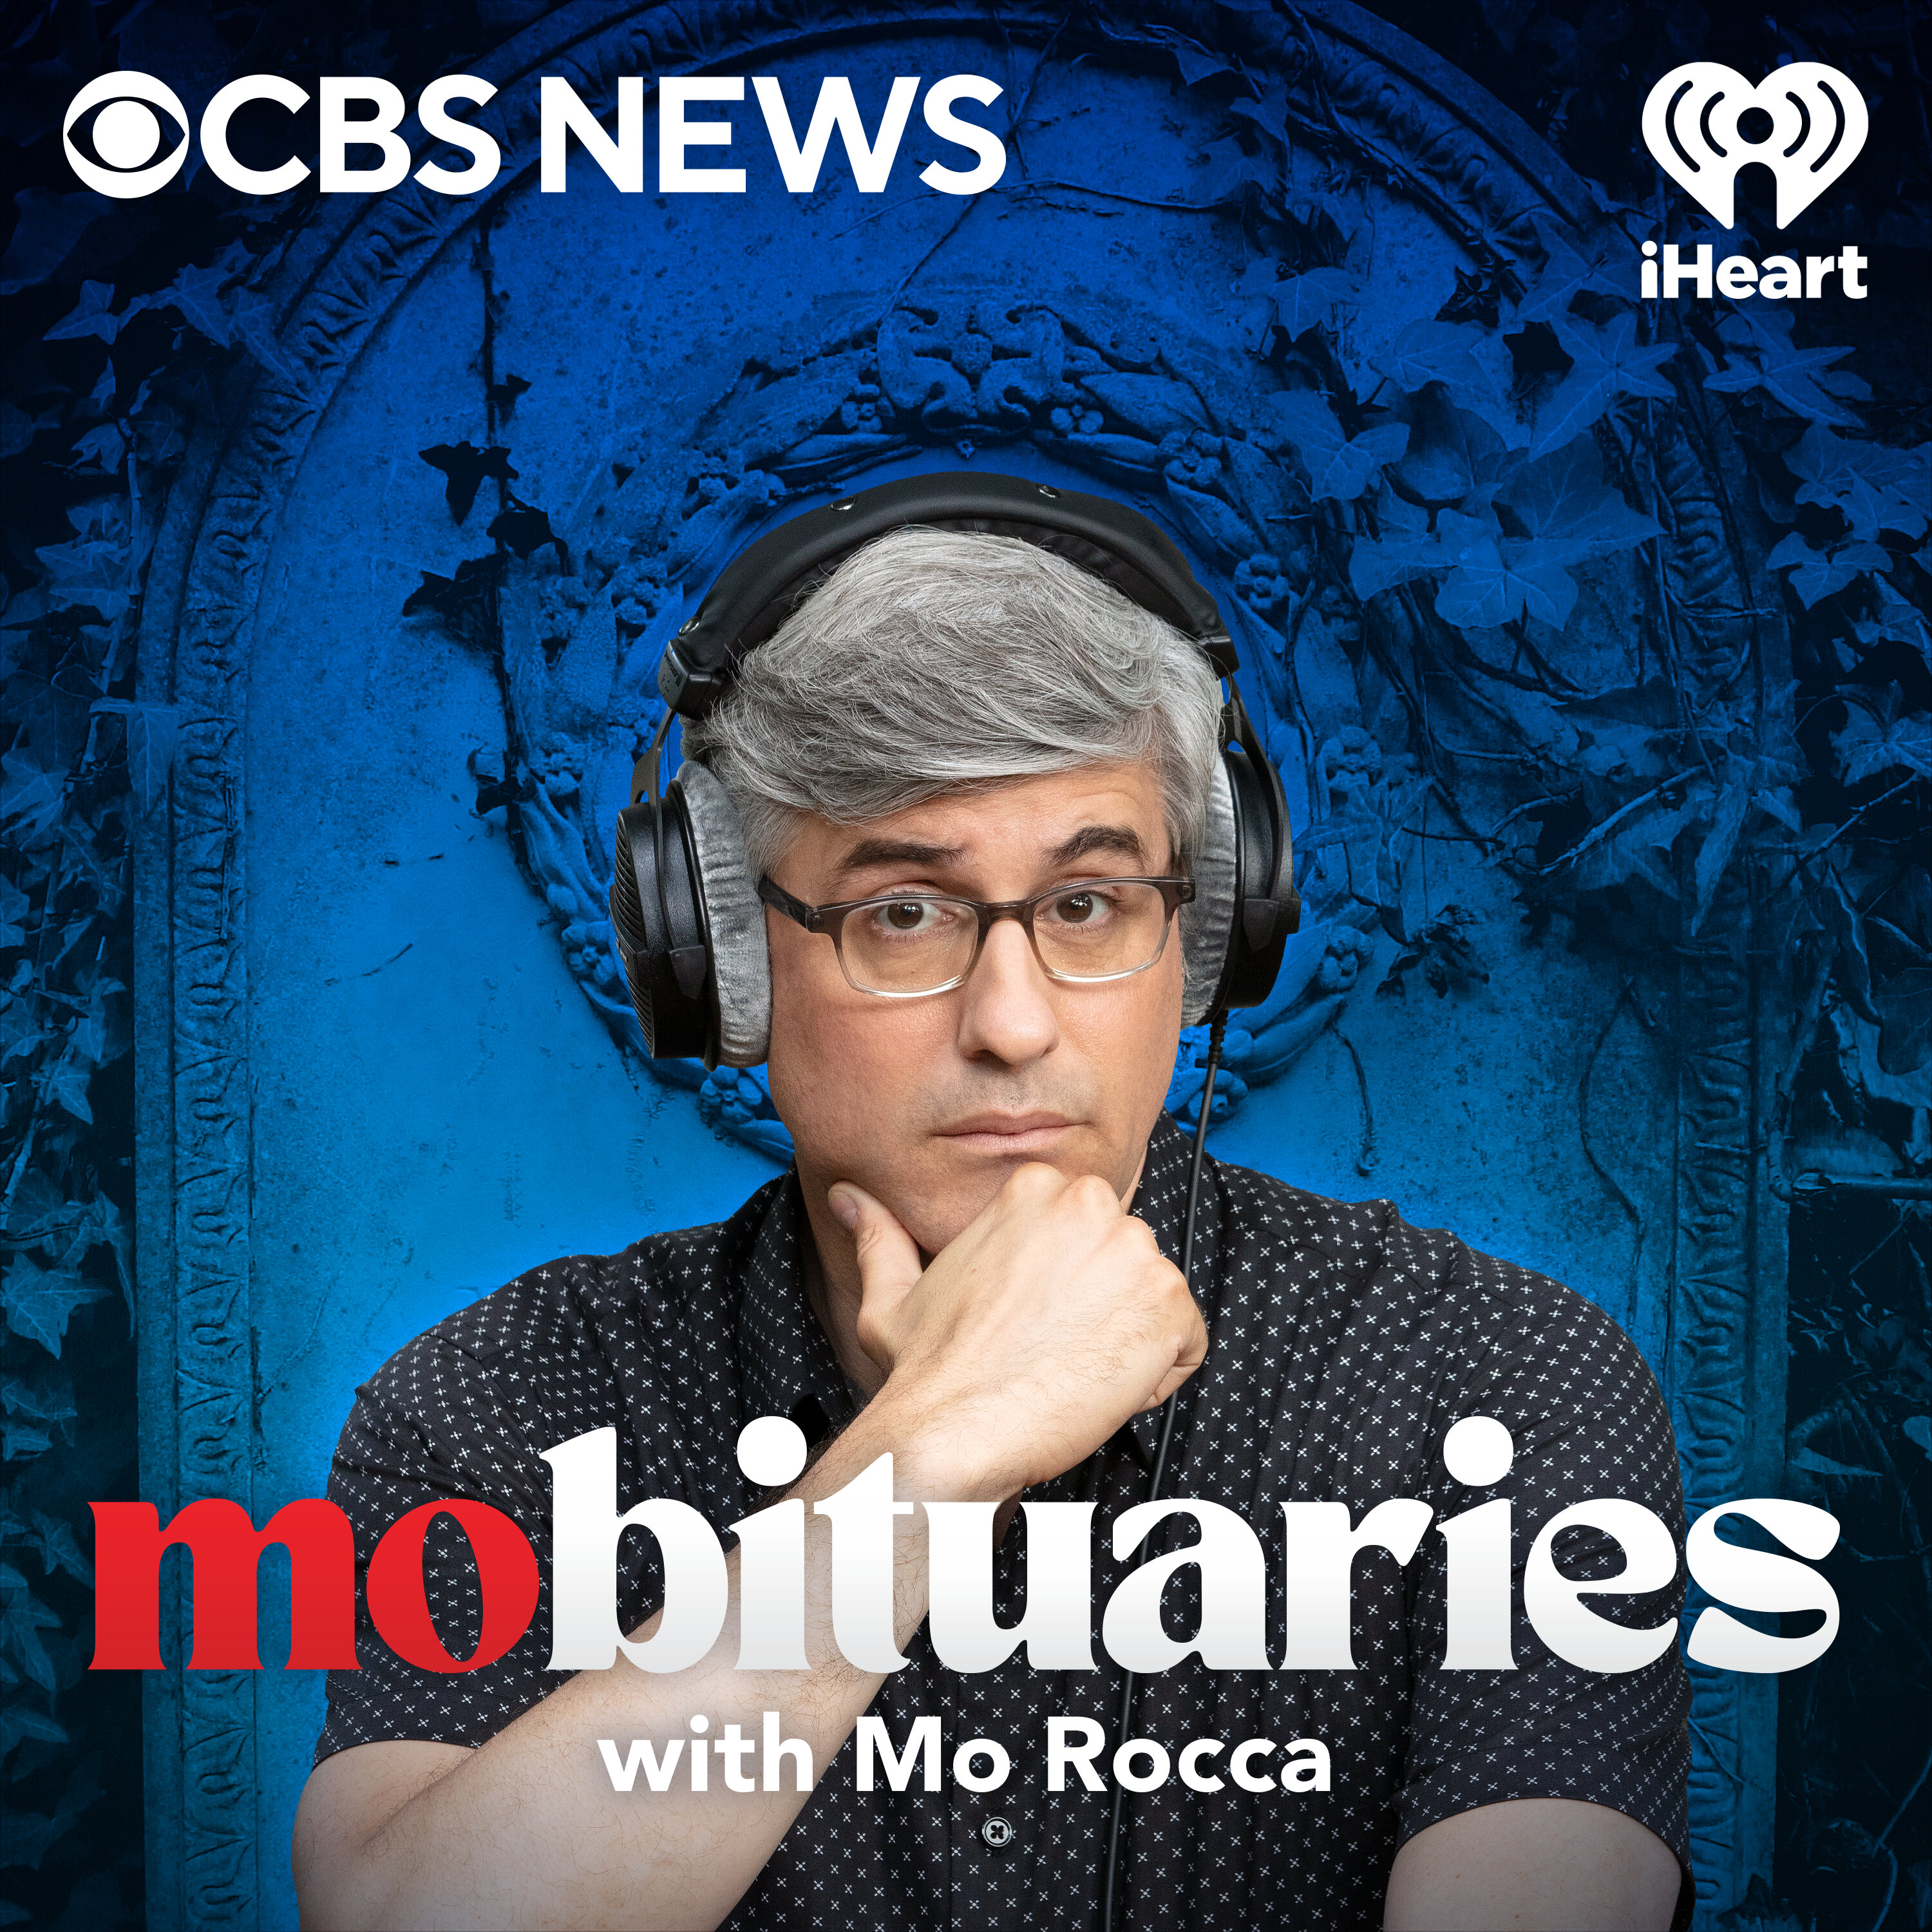 Mobits Extra: Leslie Uggams & The Power of Love by CBS News & iHeartPodcasts